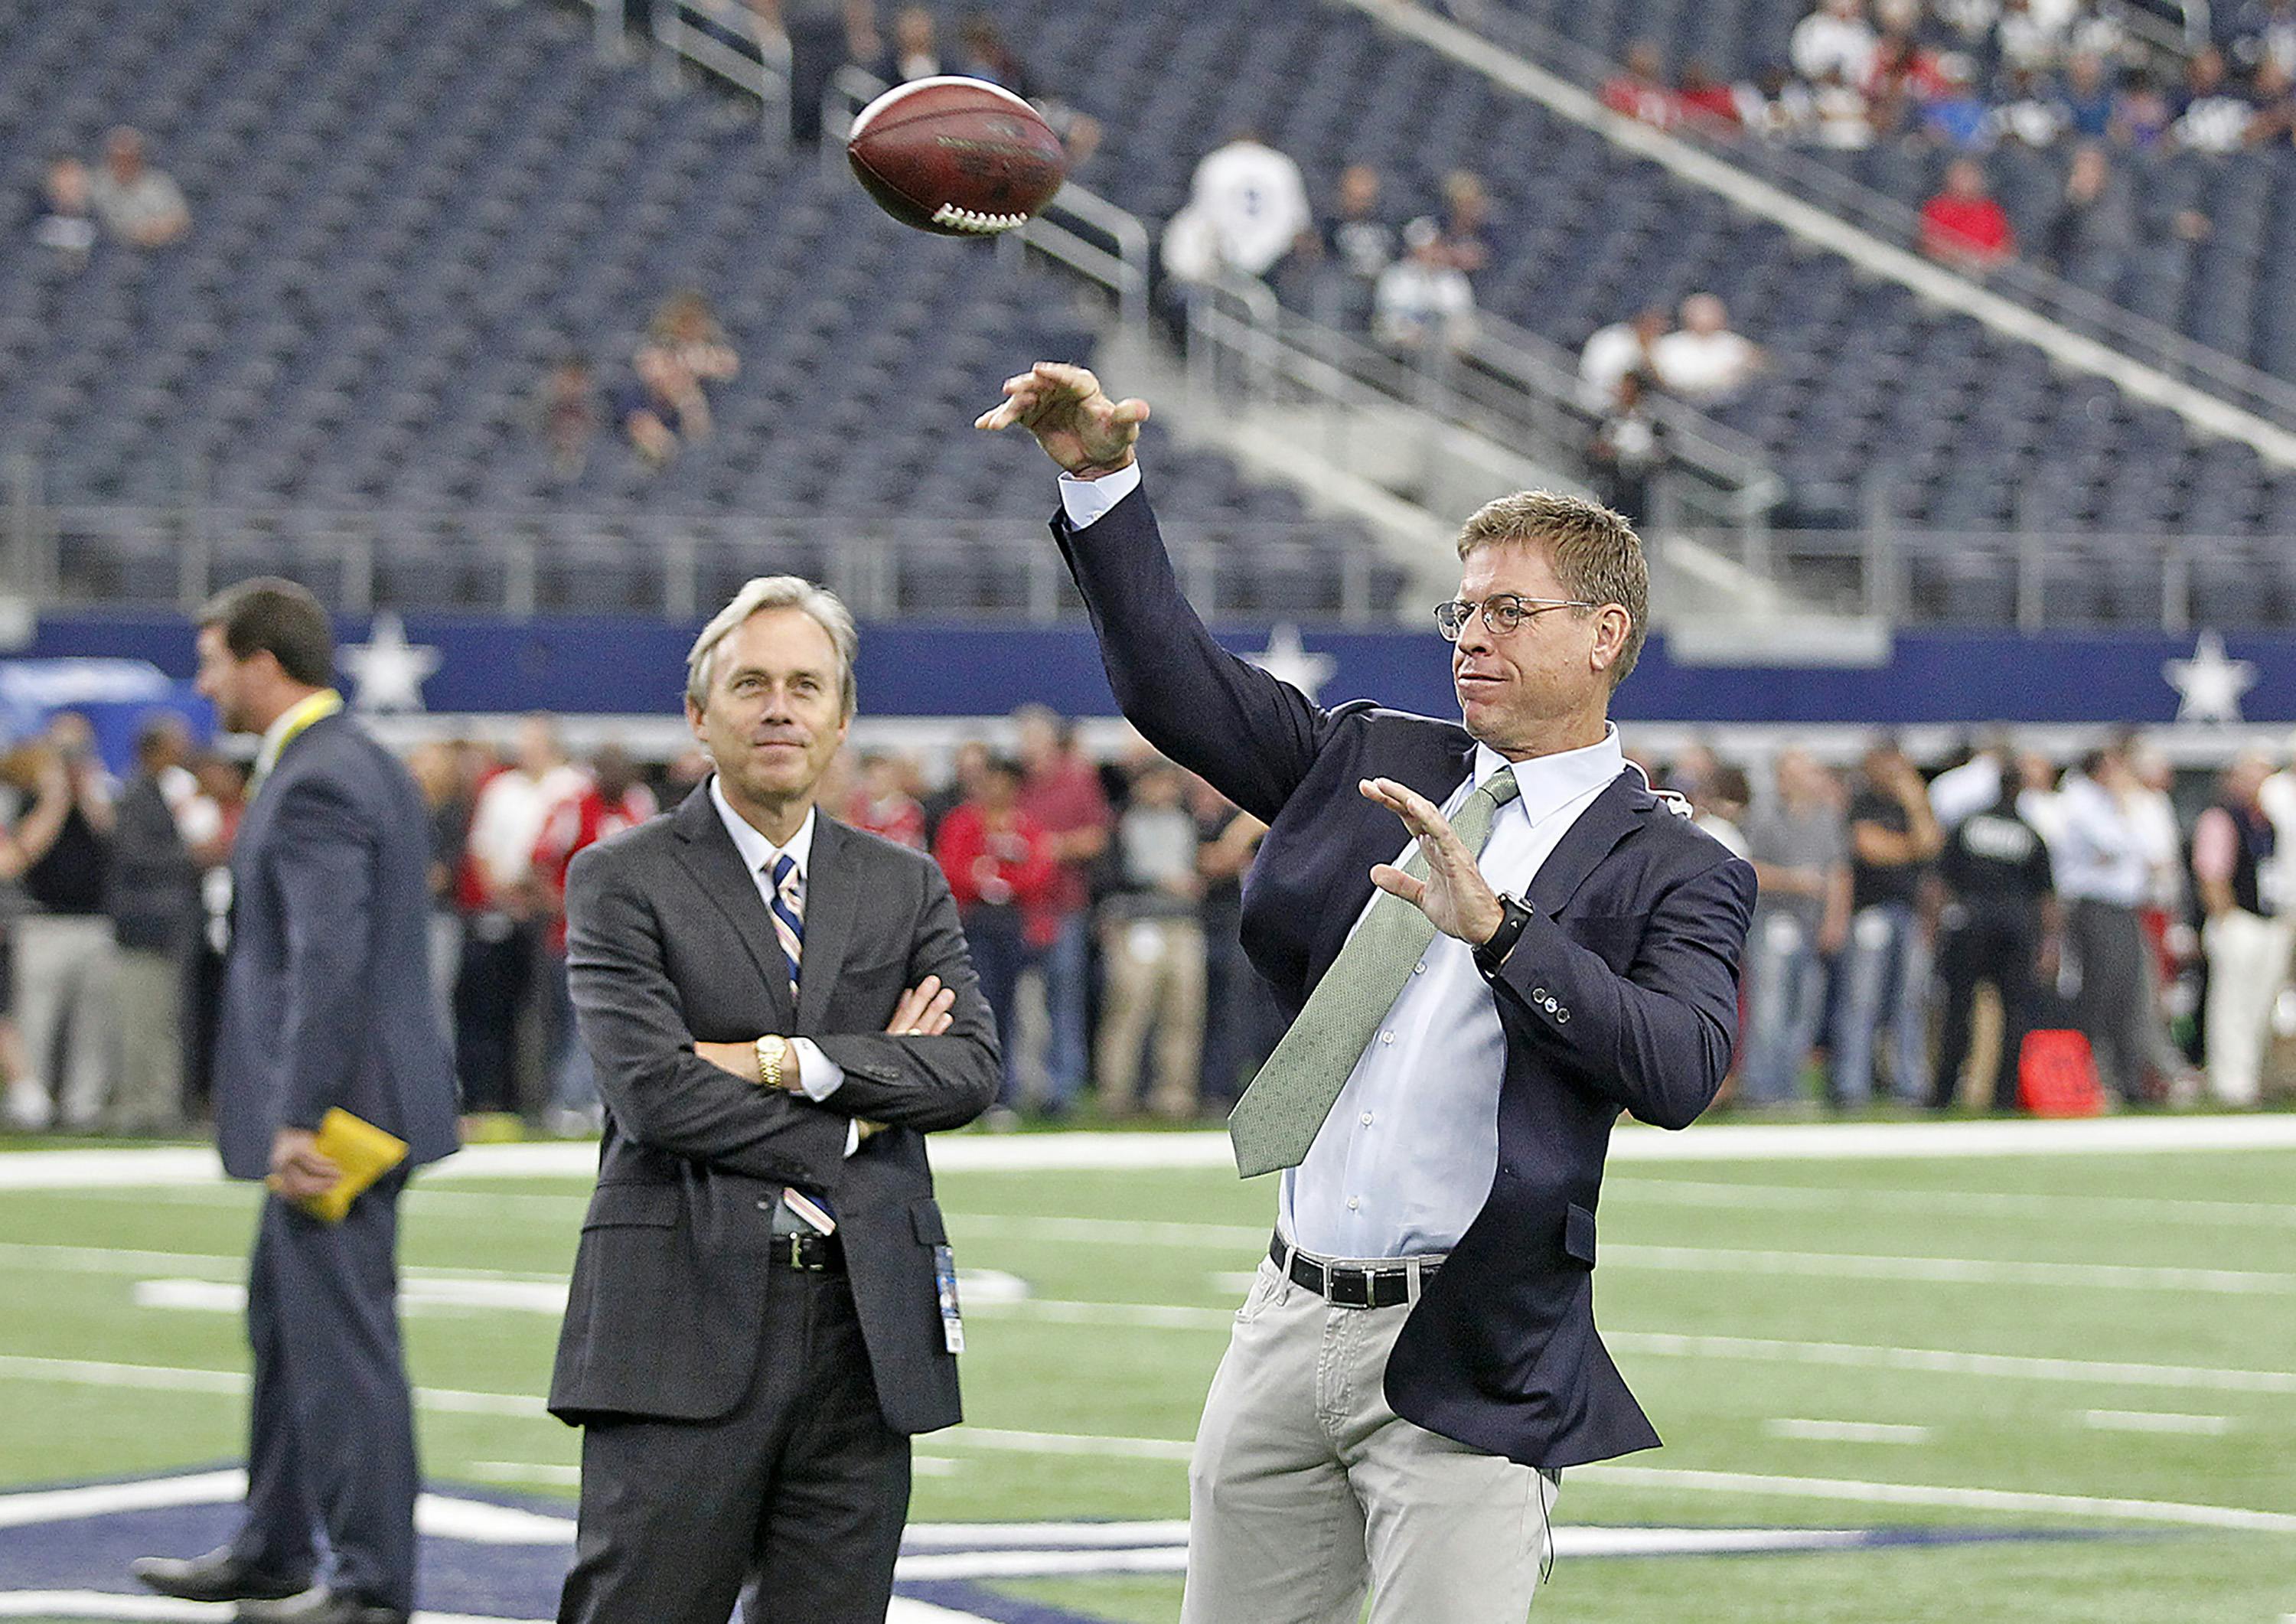 Fox Sports announcer Troy Aikman passes before an NFL game between the Dallas Cowboys against the Atlanta Falcons at AT&T Stadium in Arlington, Texas, Sunday, September 27, 2015.   The Falcons defeated the Cowboys, 39-28.  (James D. Smith via AP)